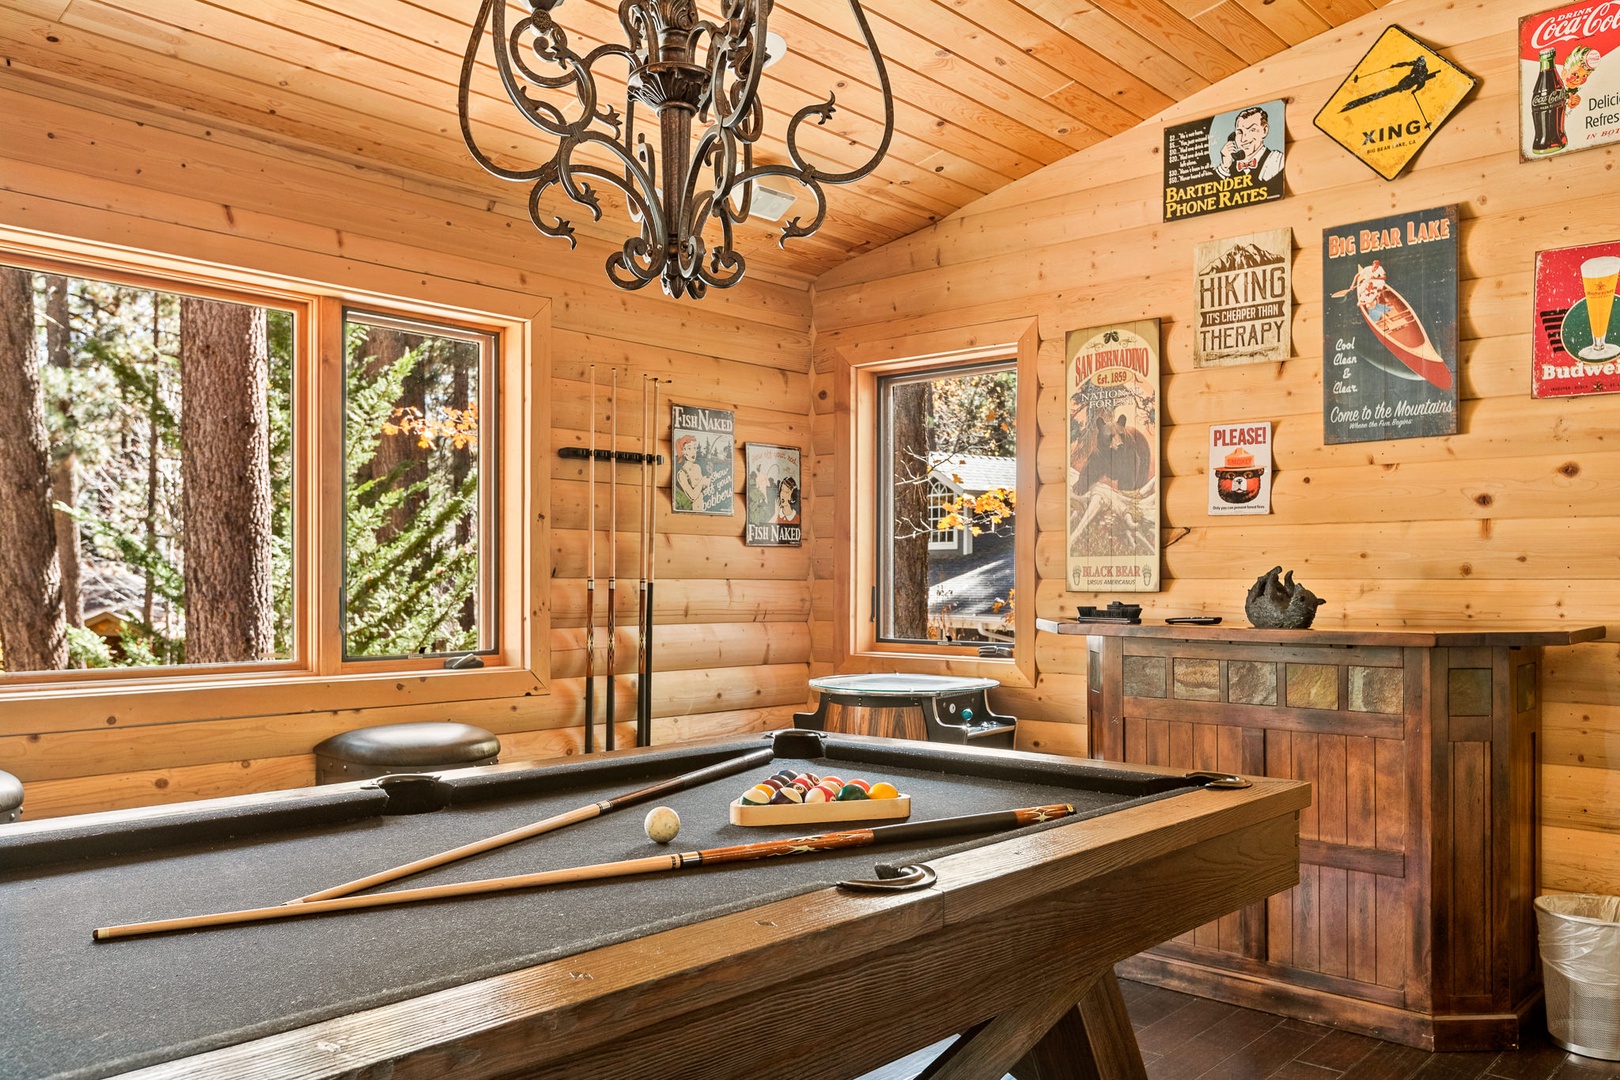 Game room with pool table, arcade game, and electric dart board